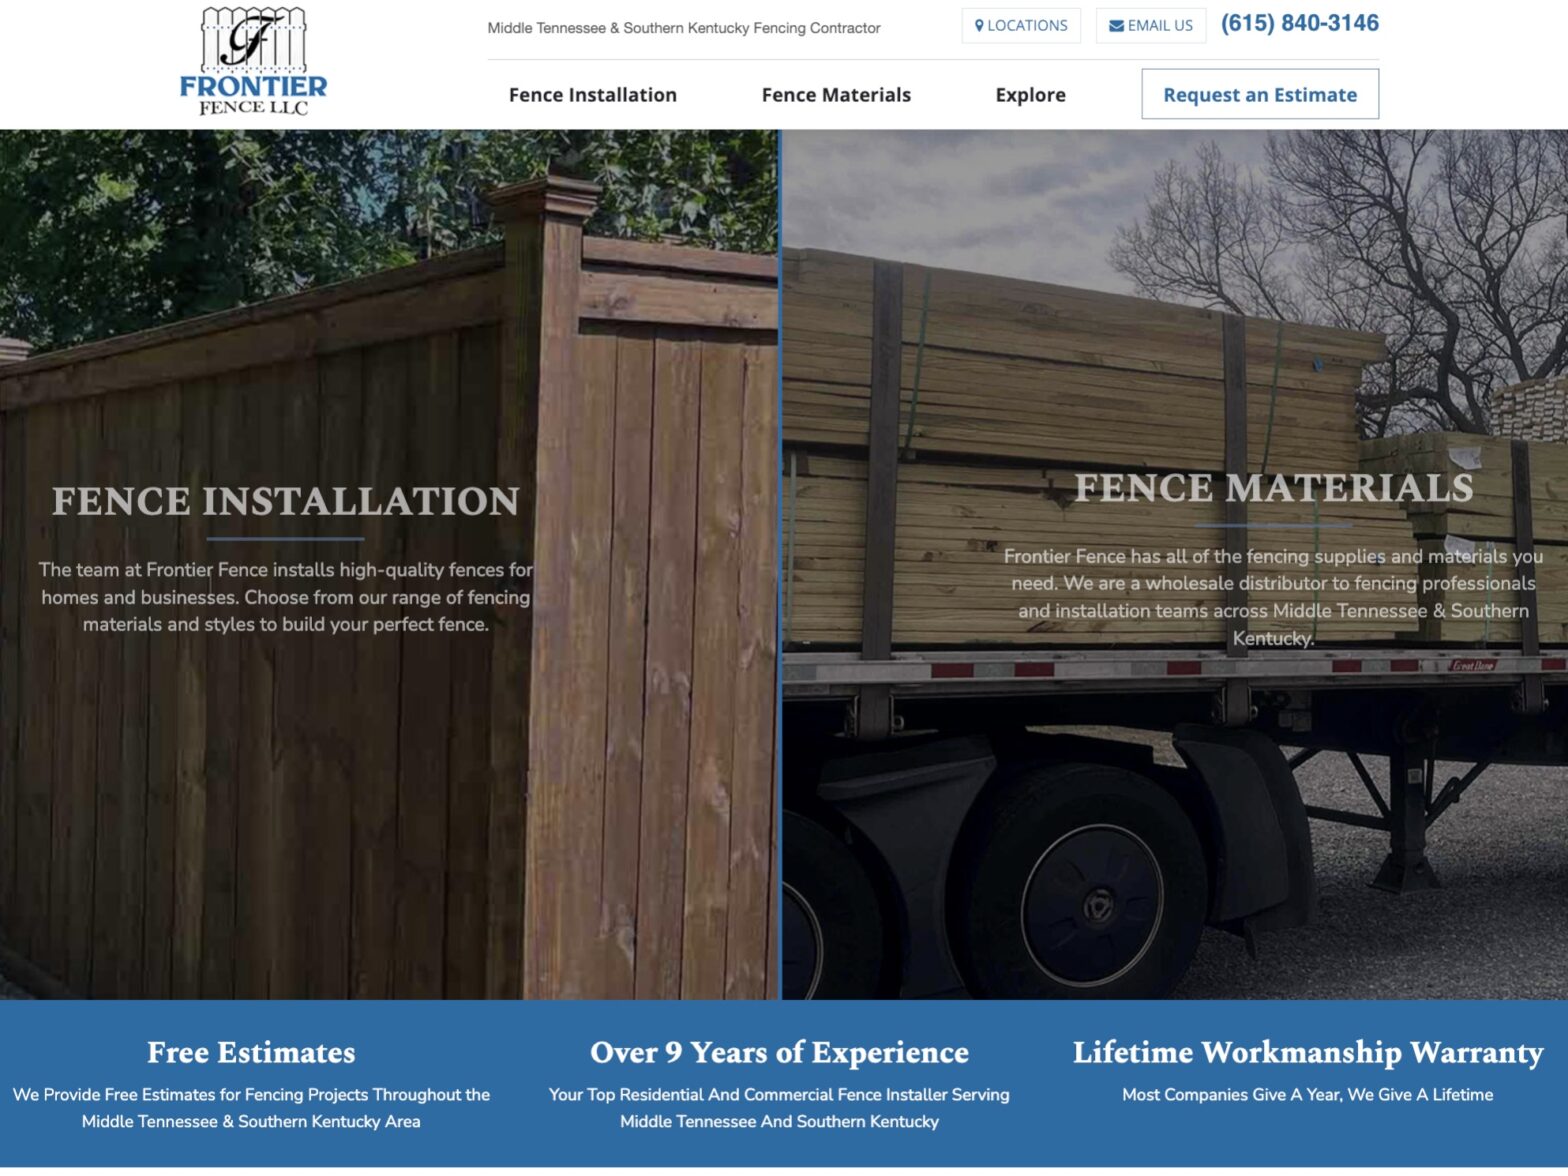 Photo of the website of a Middle Tennessee fence company